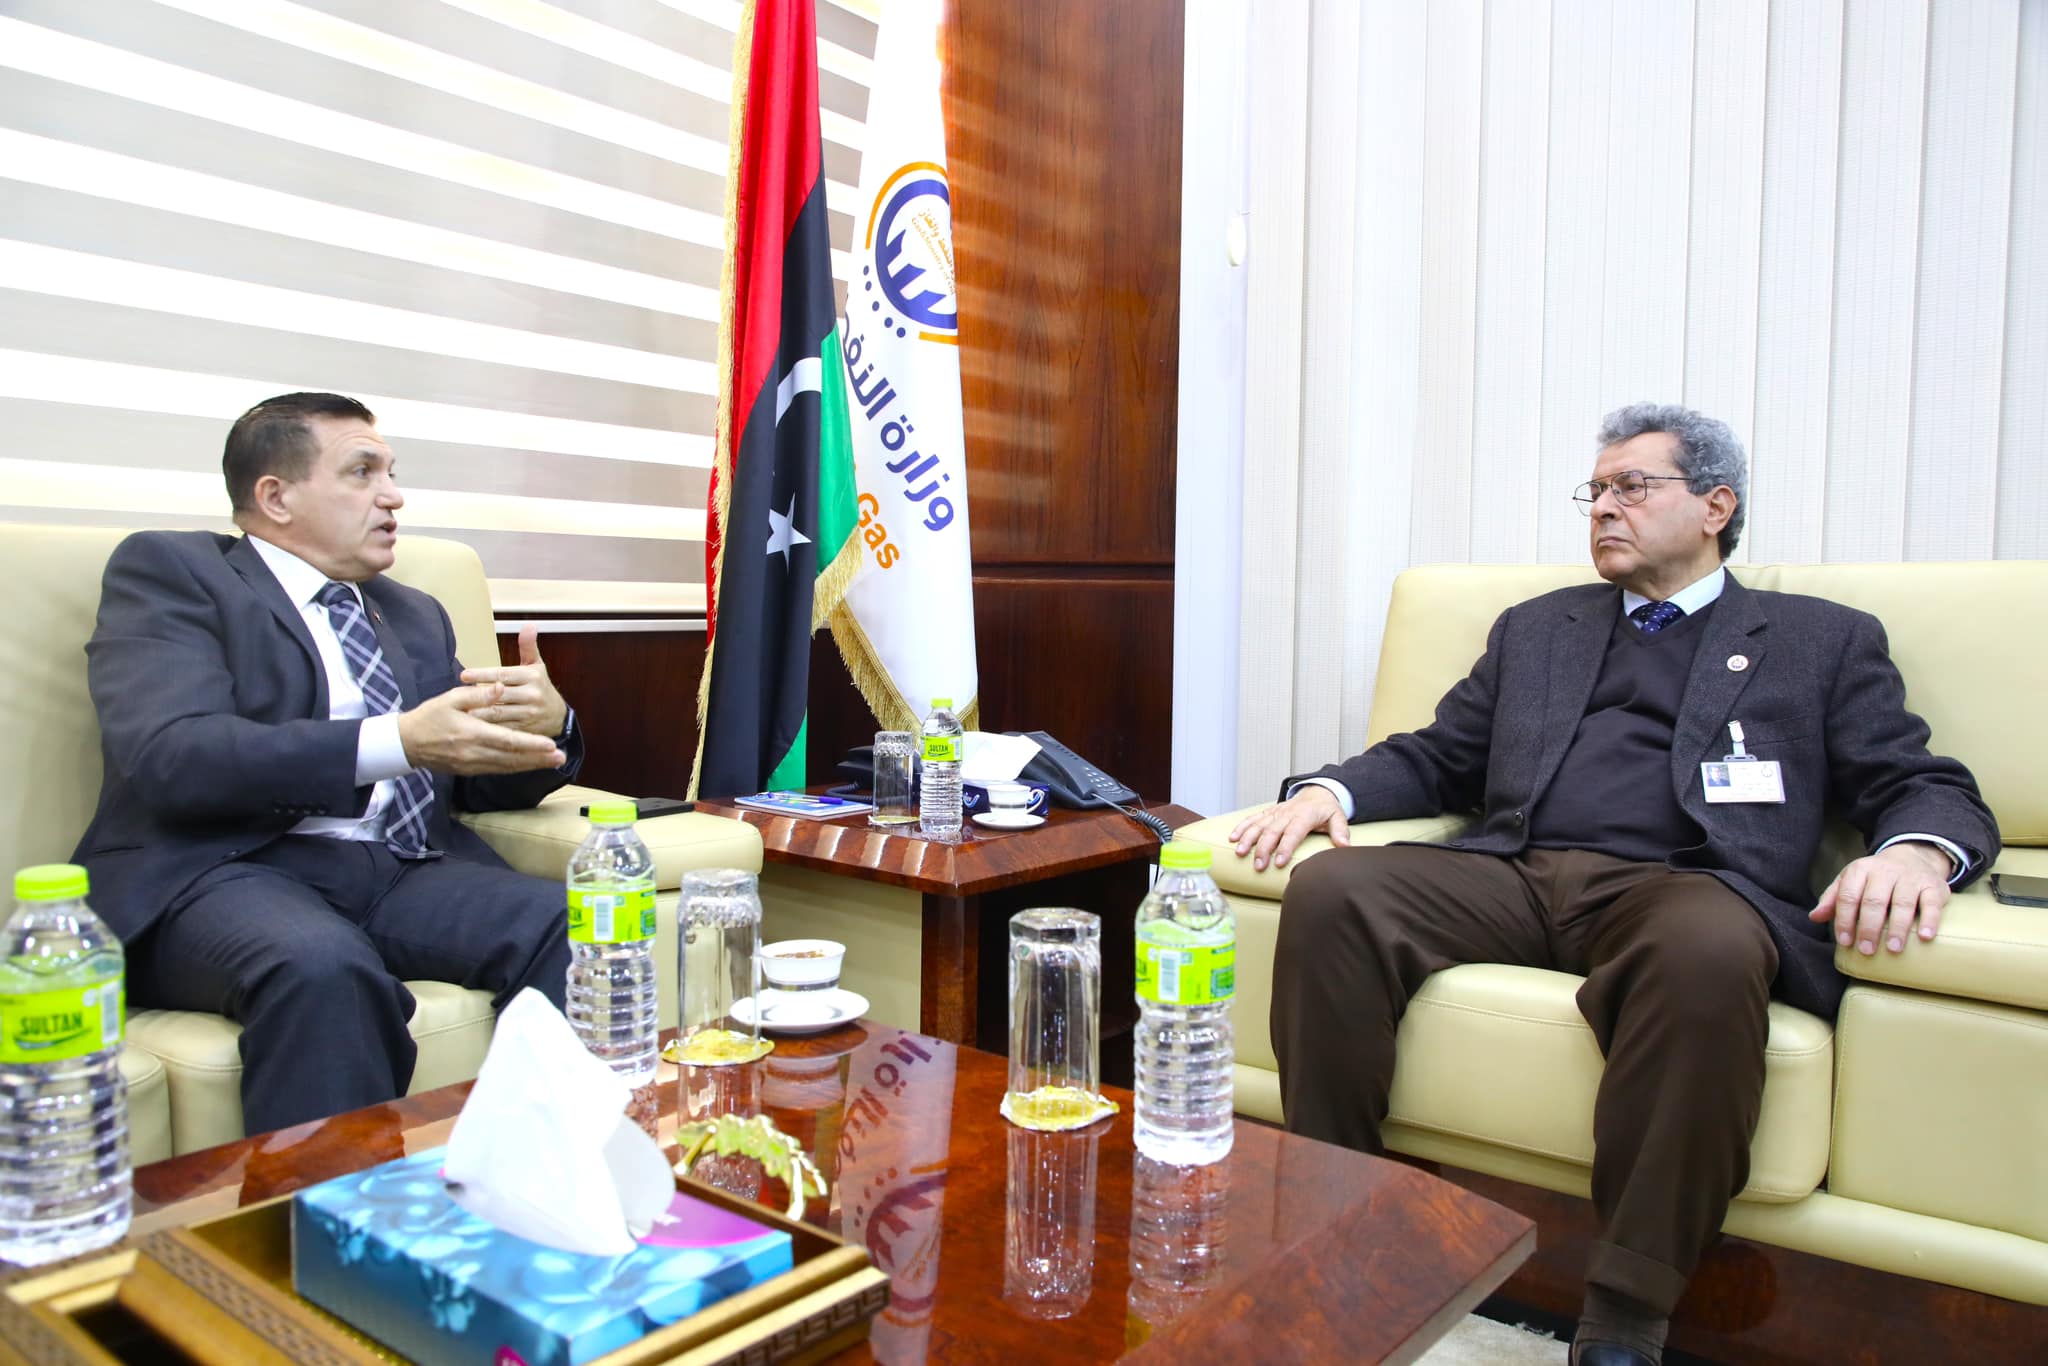 Libya, Malta discuss cooperation and joint oil exploration initiatives | The Libya Observer